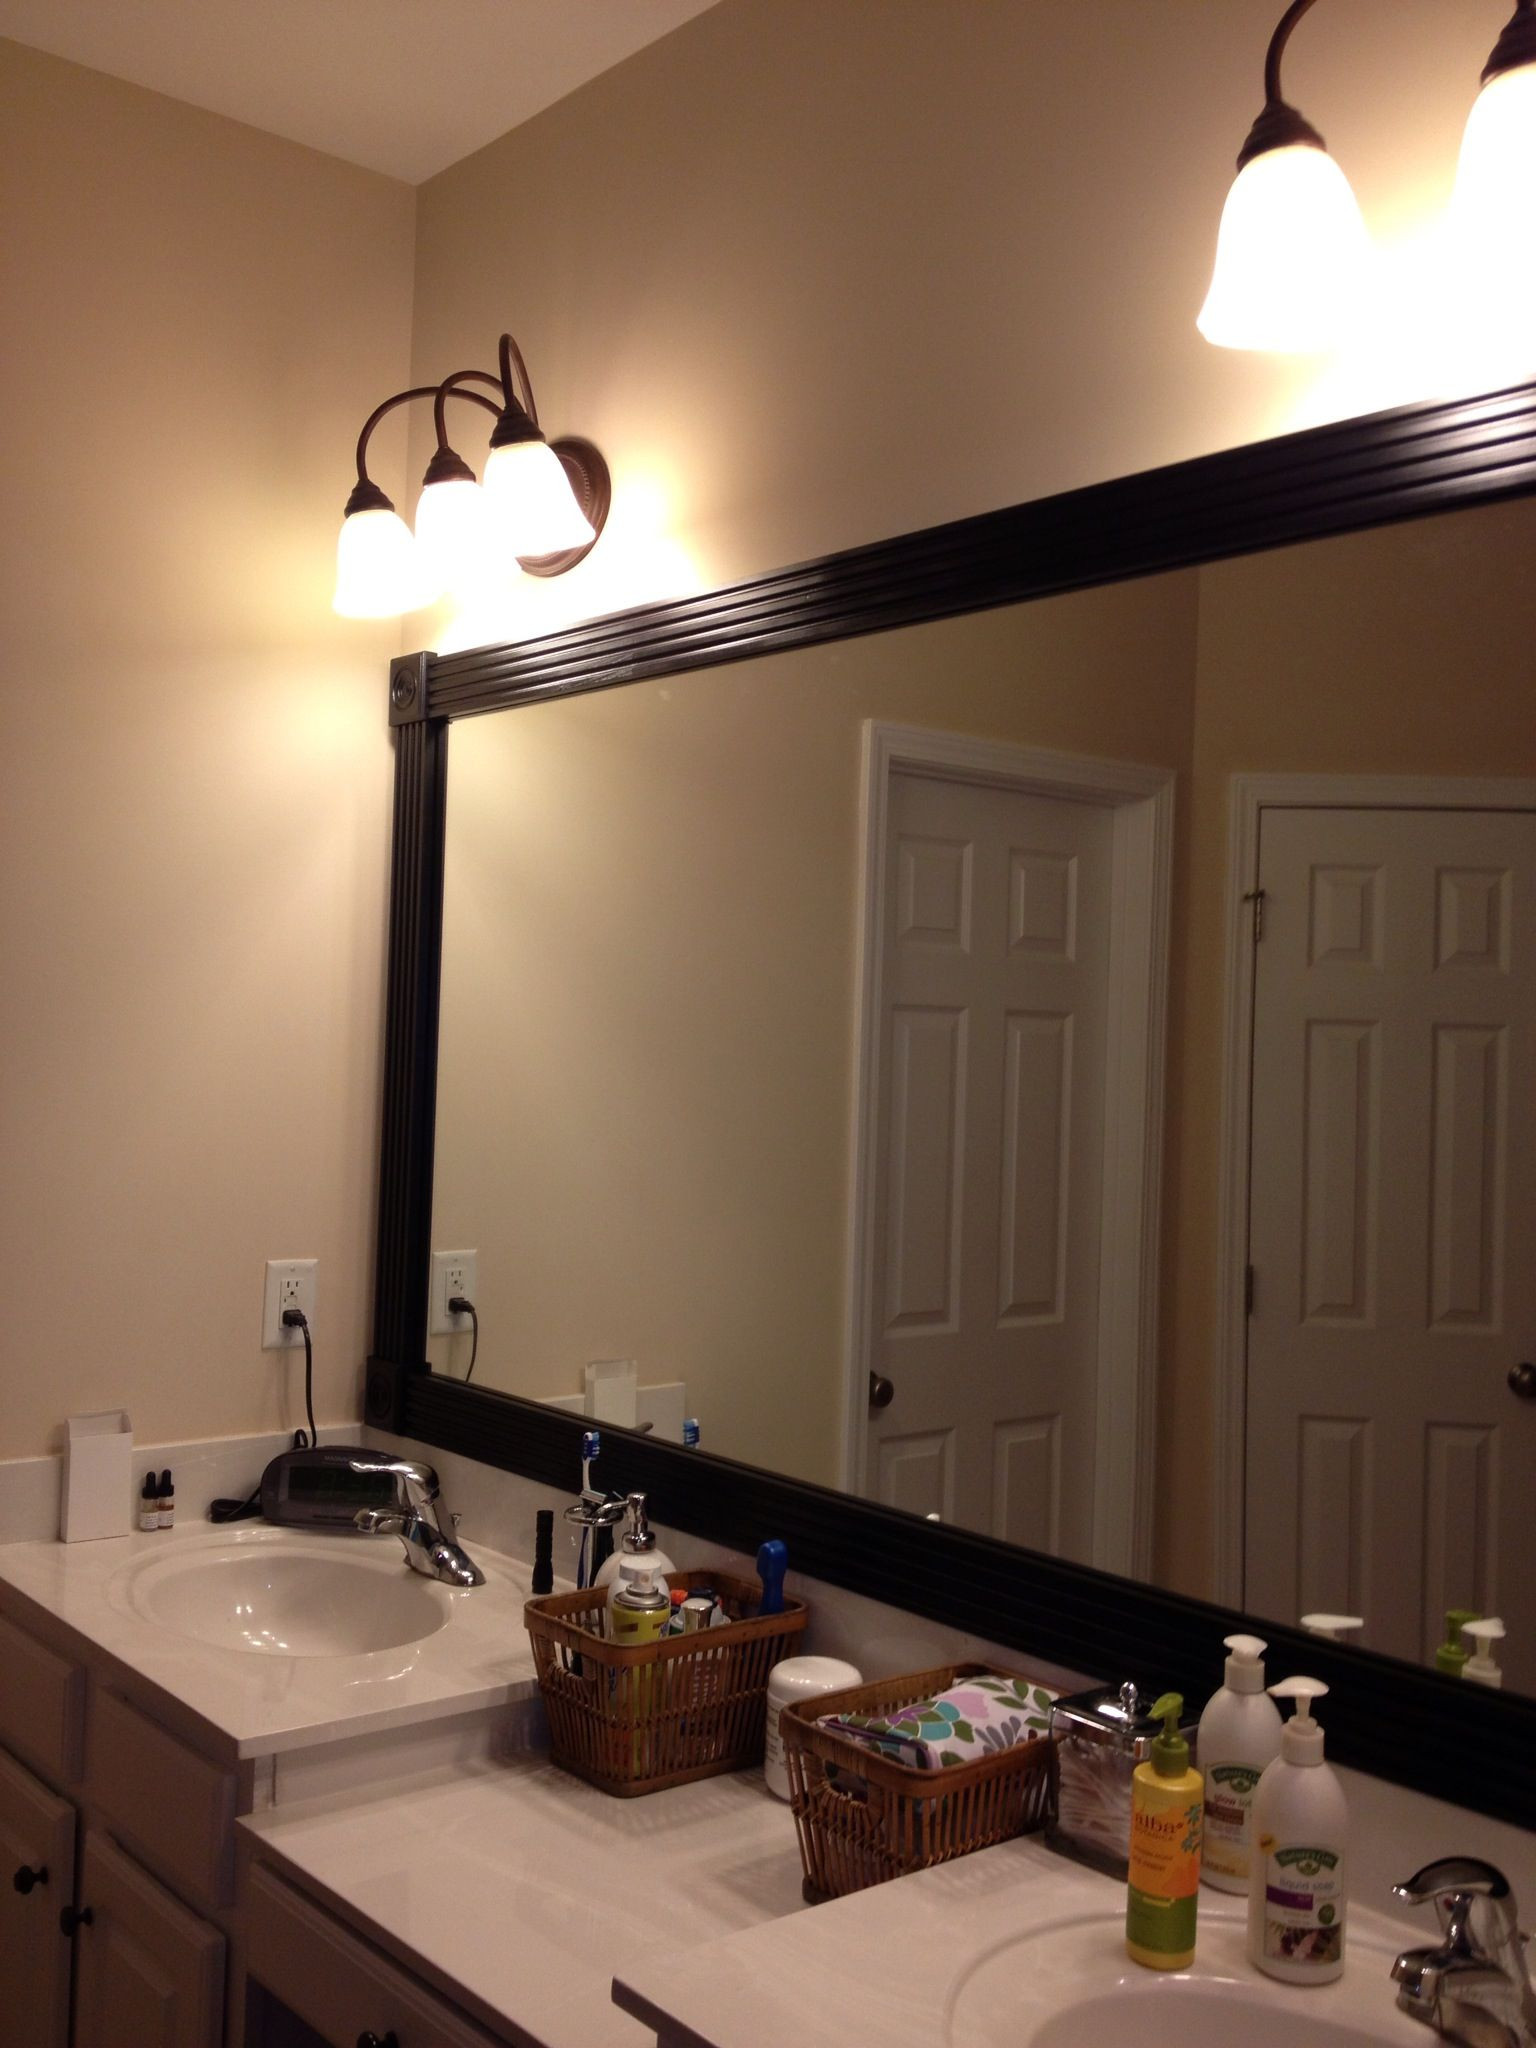 Double Vanity Mirrors For Bathroom
 Noticing a Bunch of Benefits in Placing the Bathroom